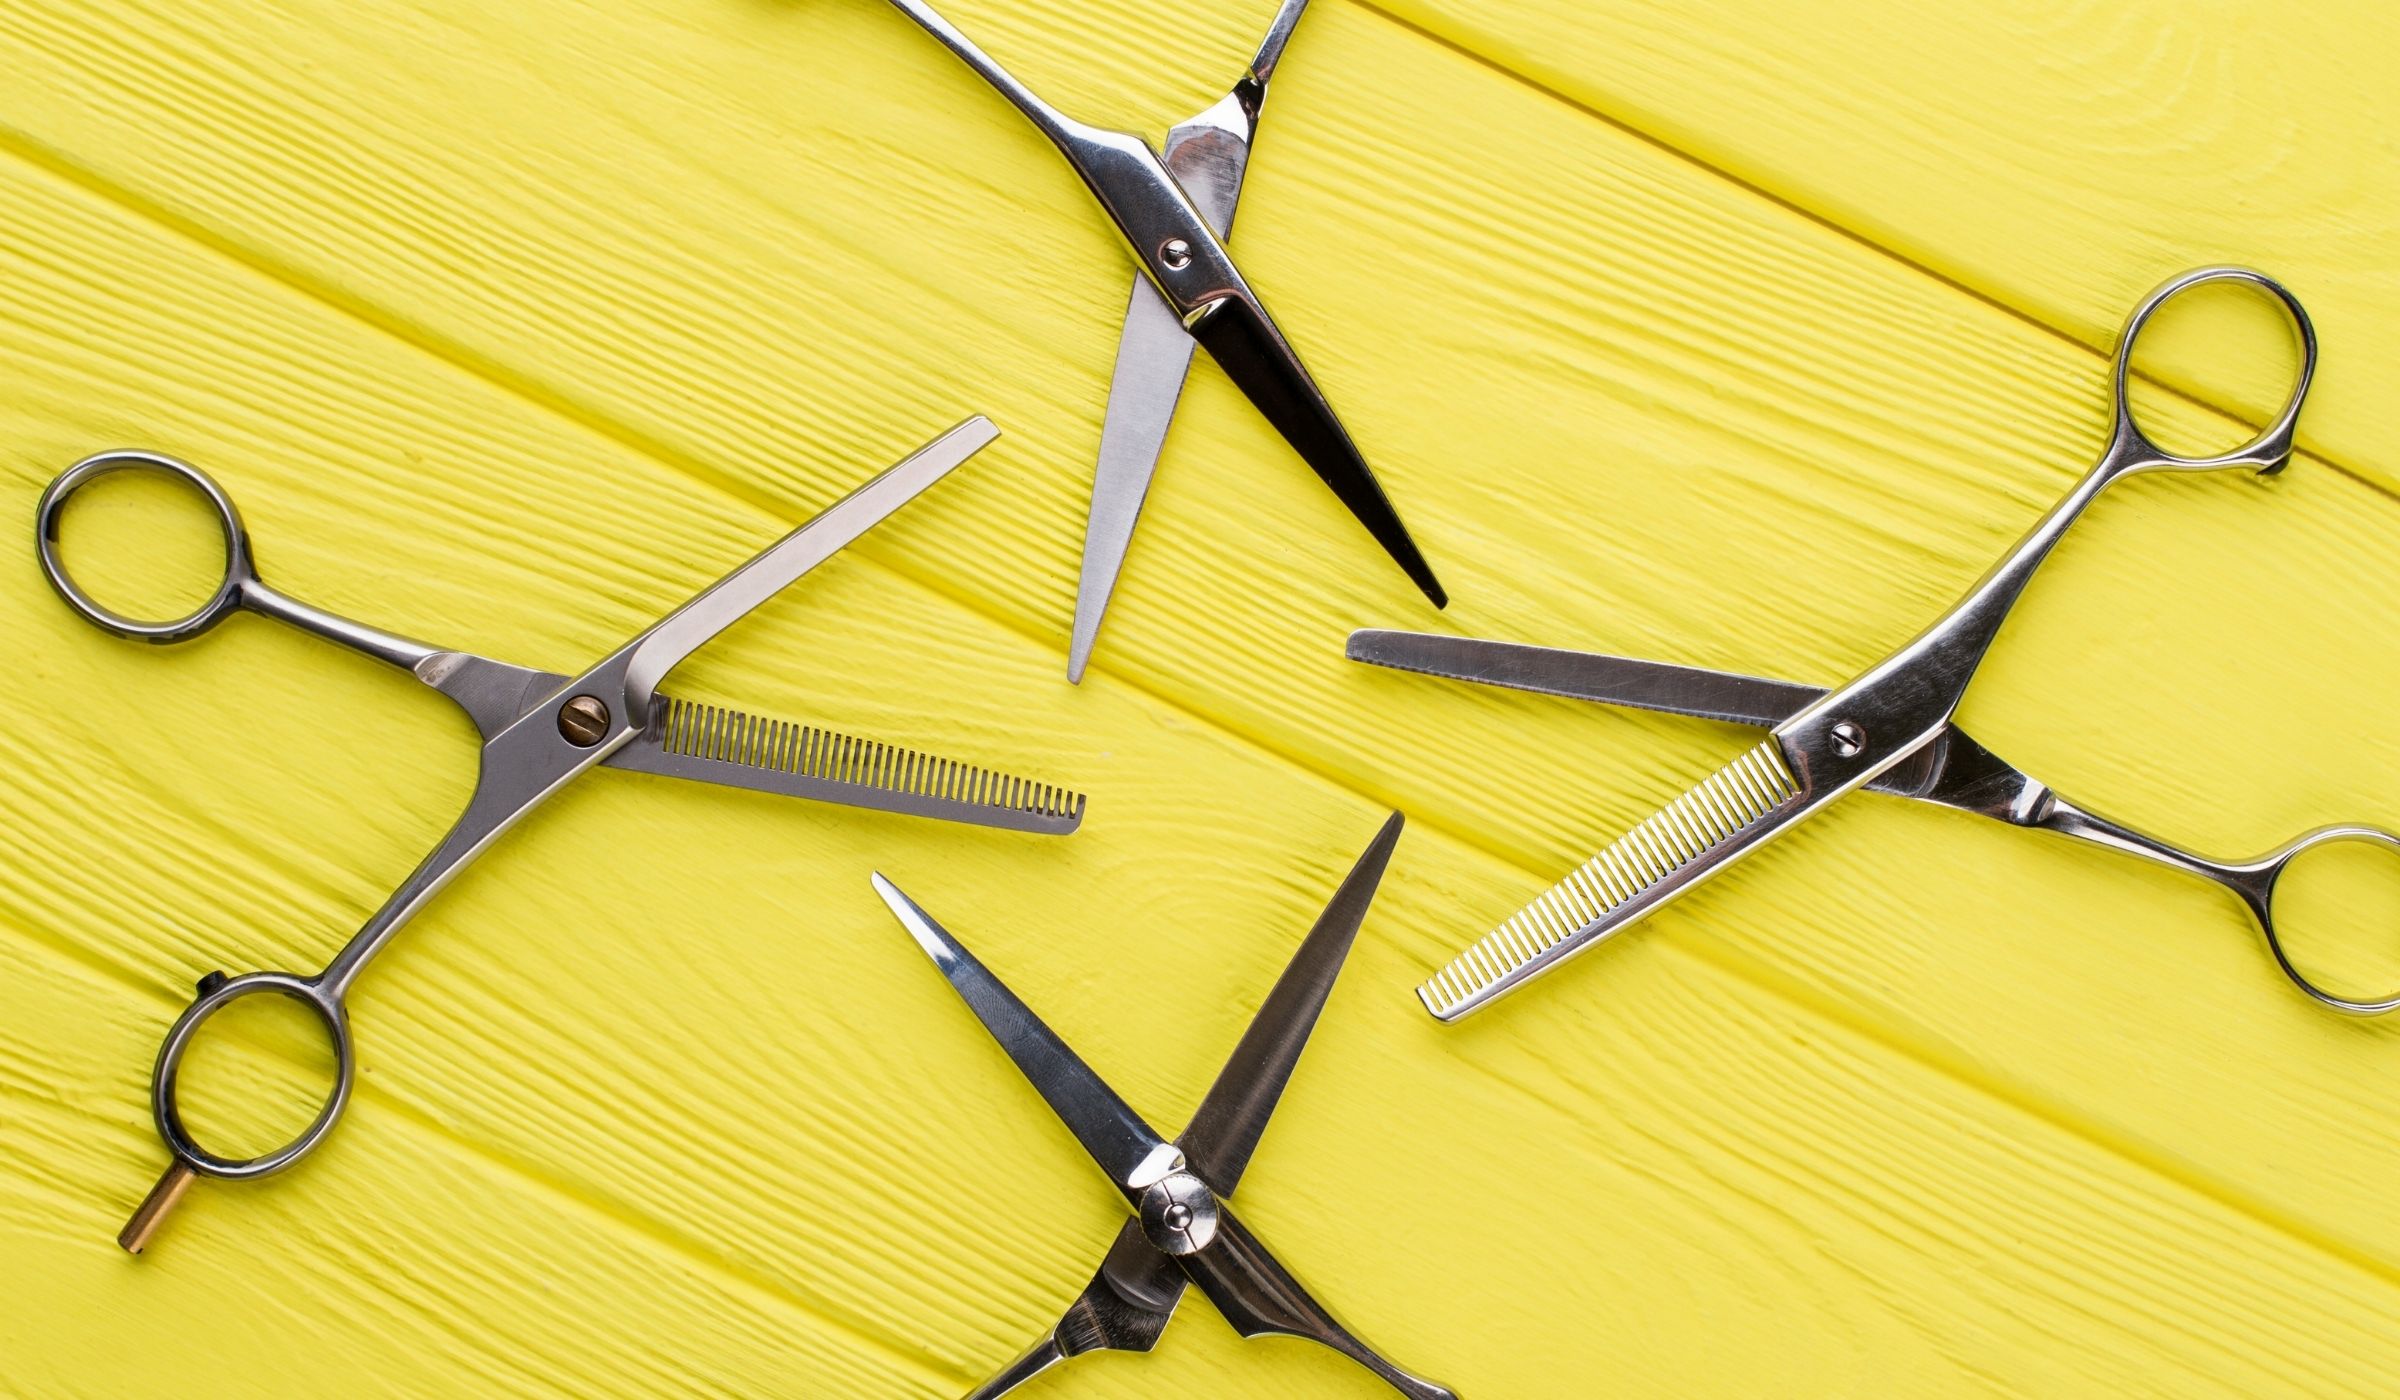 A collection of Mina Scissors on a yellow background